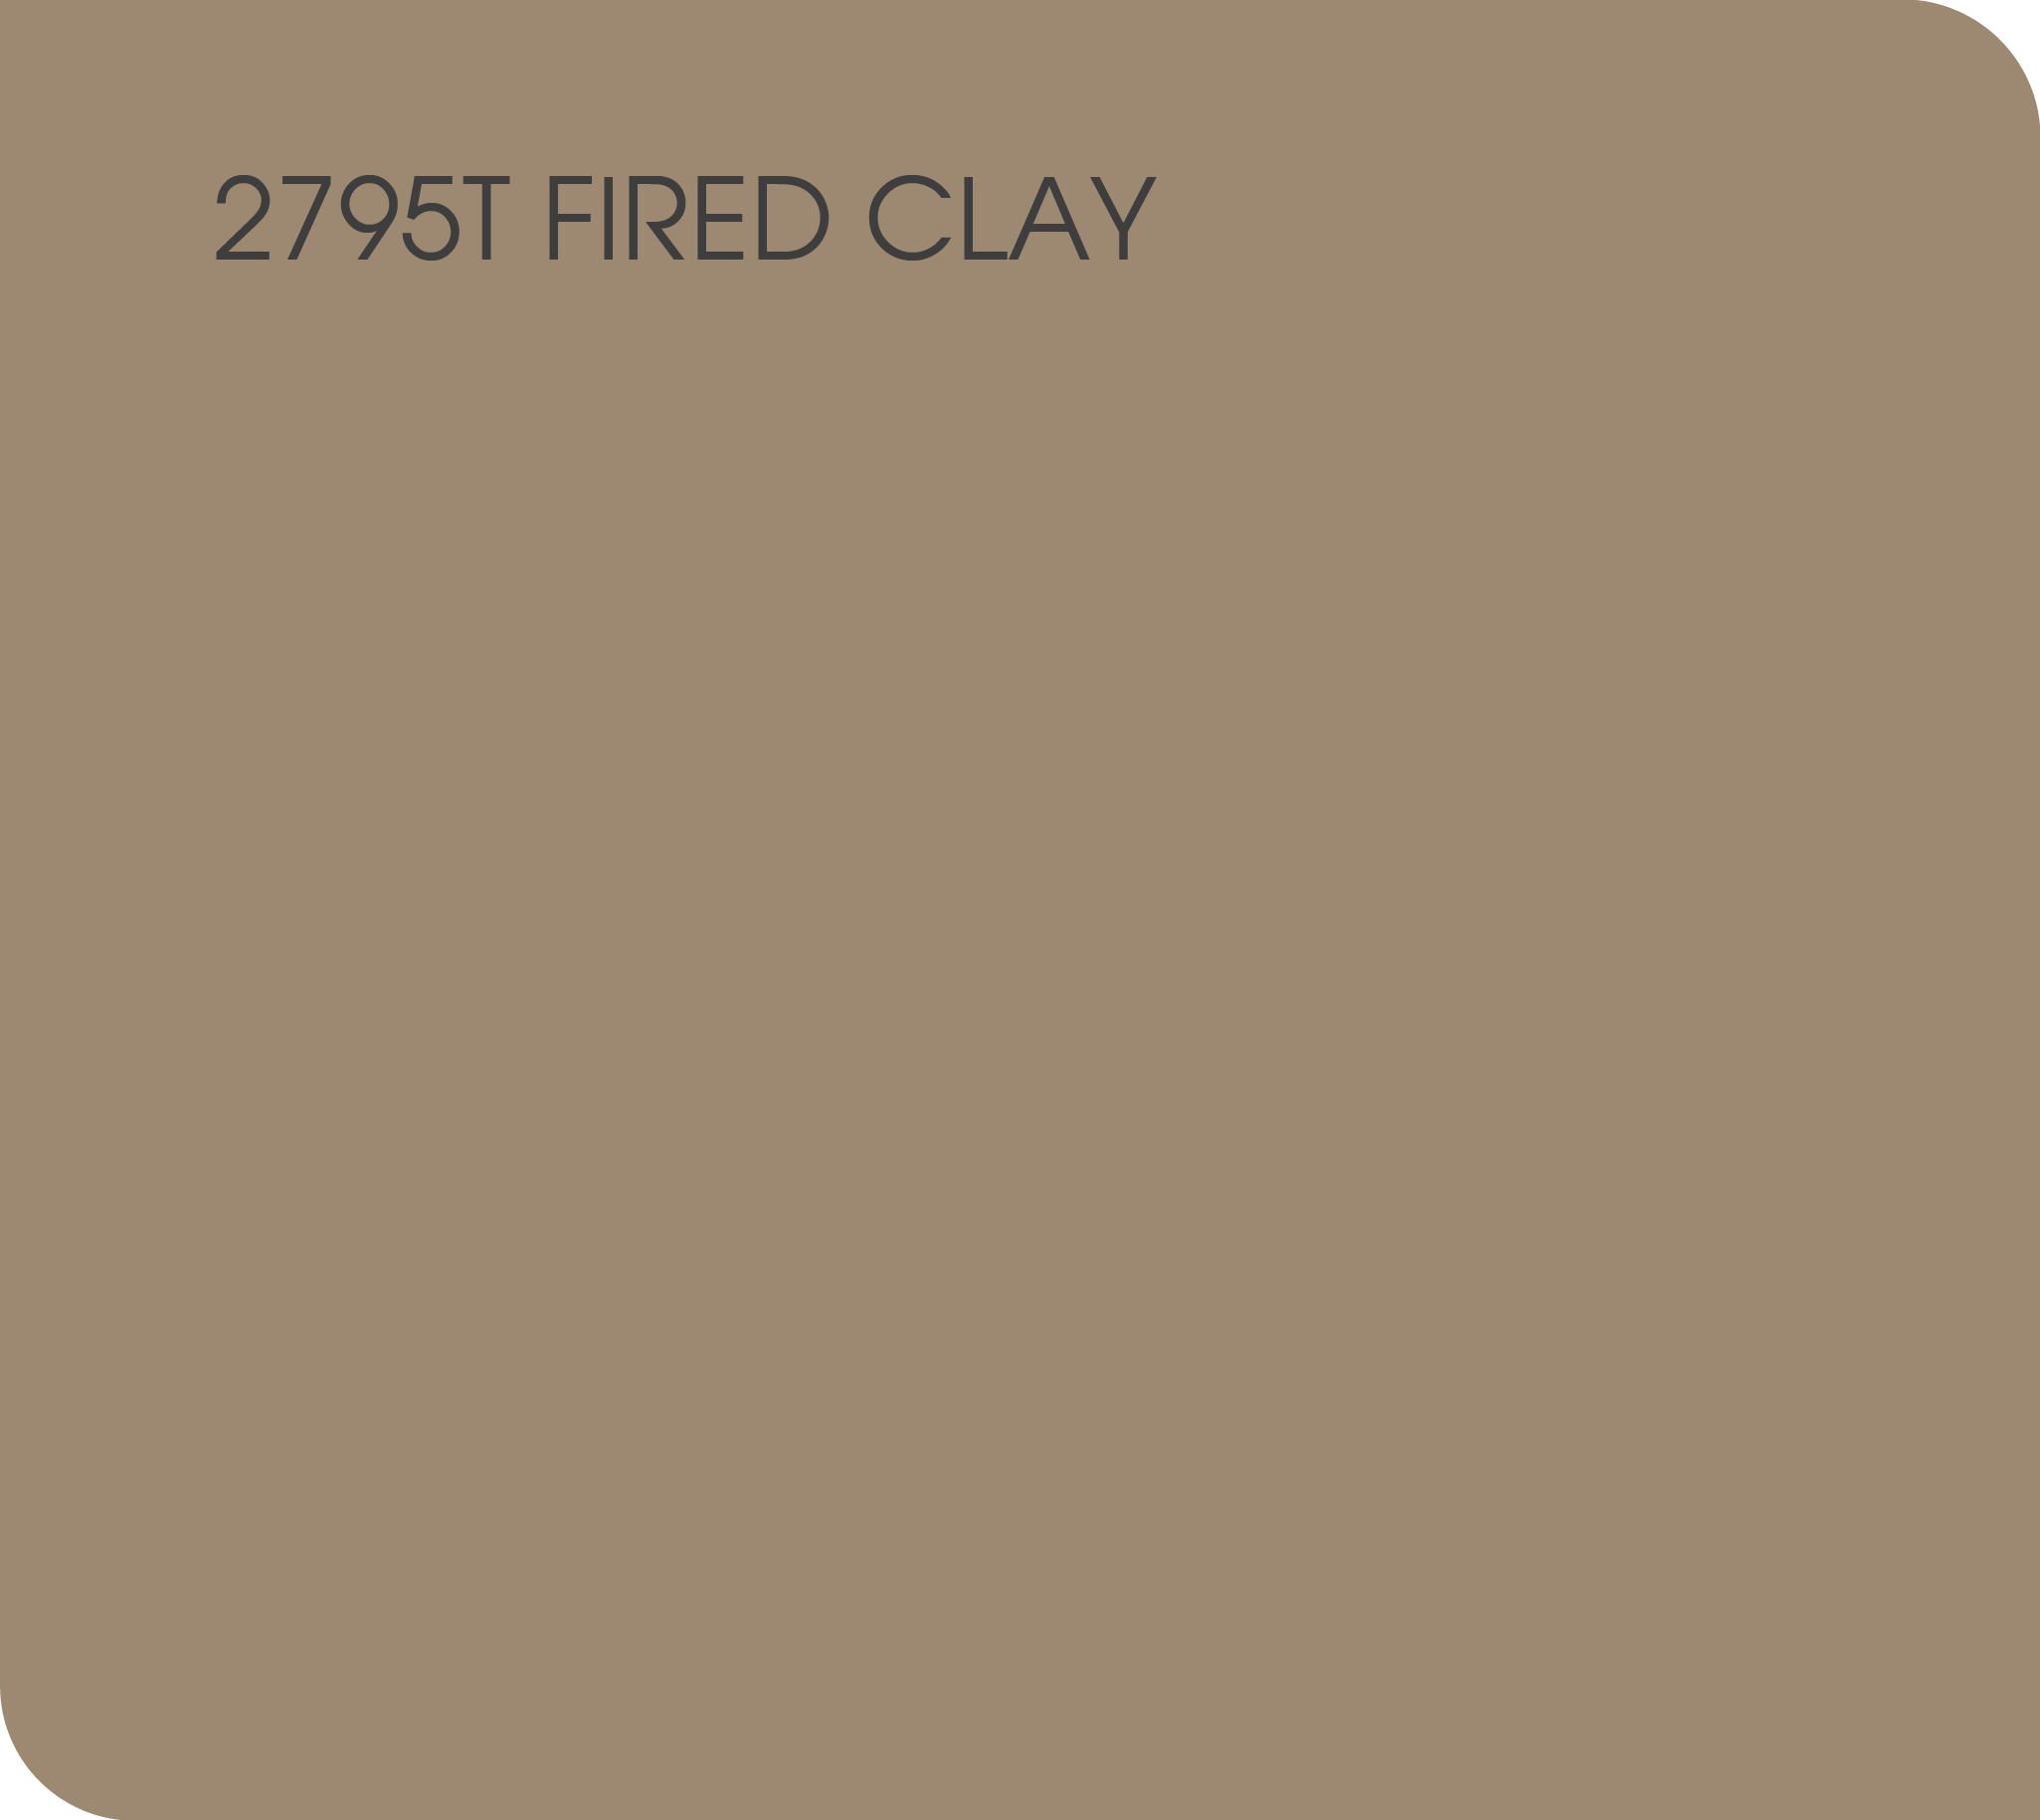 fired clay